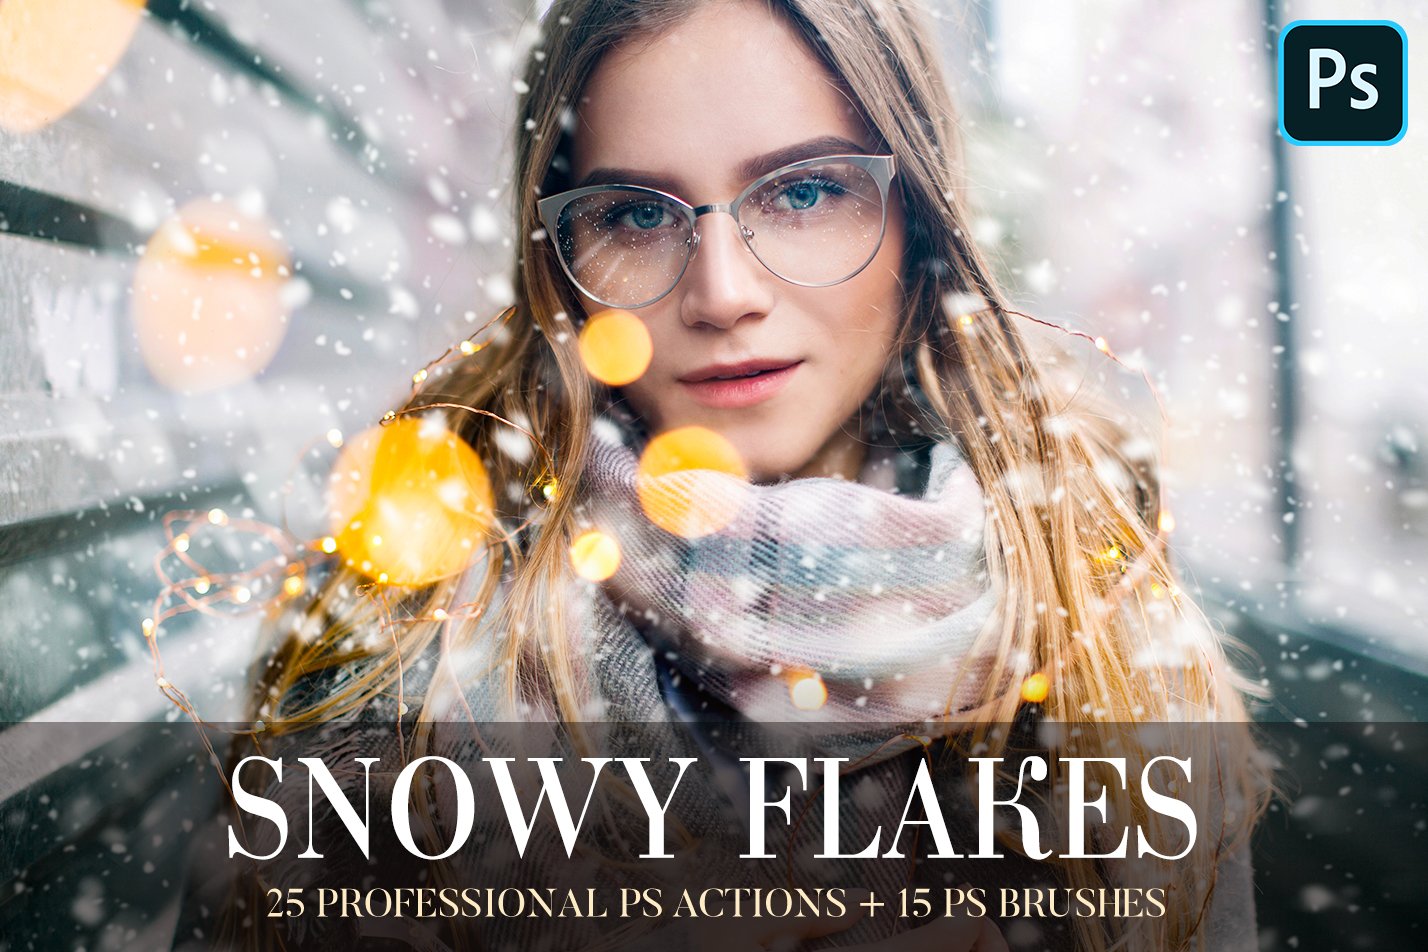 Photoshop Actions - Snowy Flakescover image.